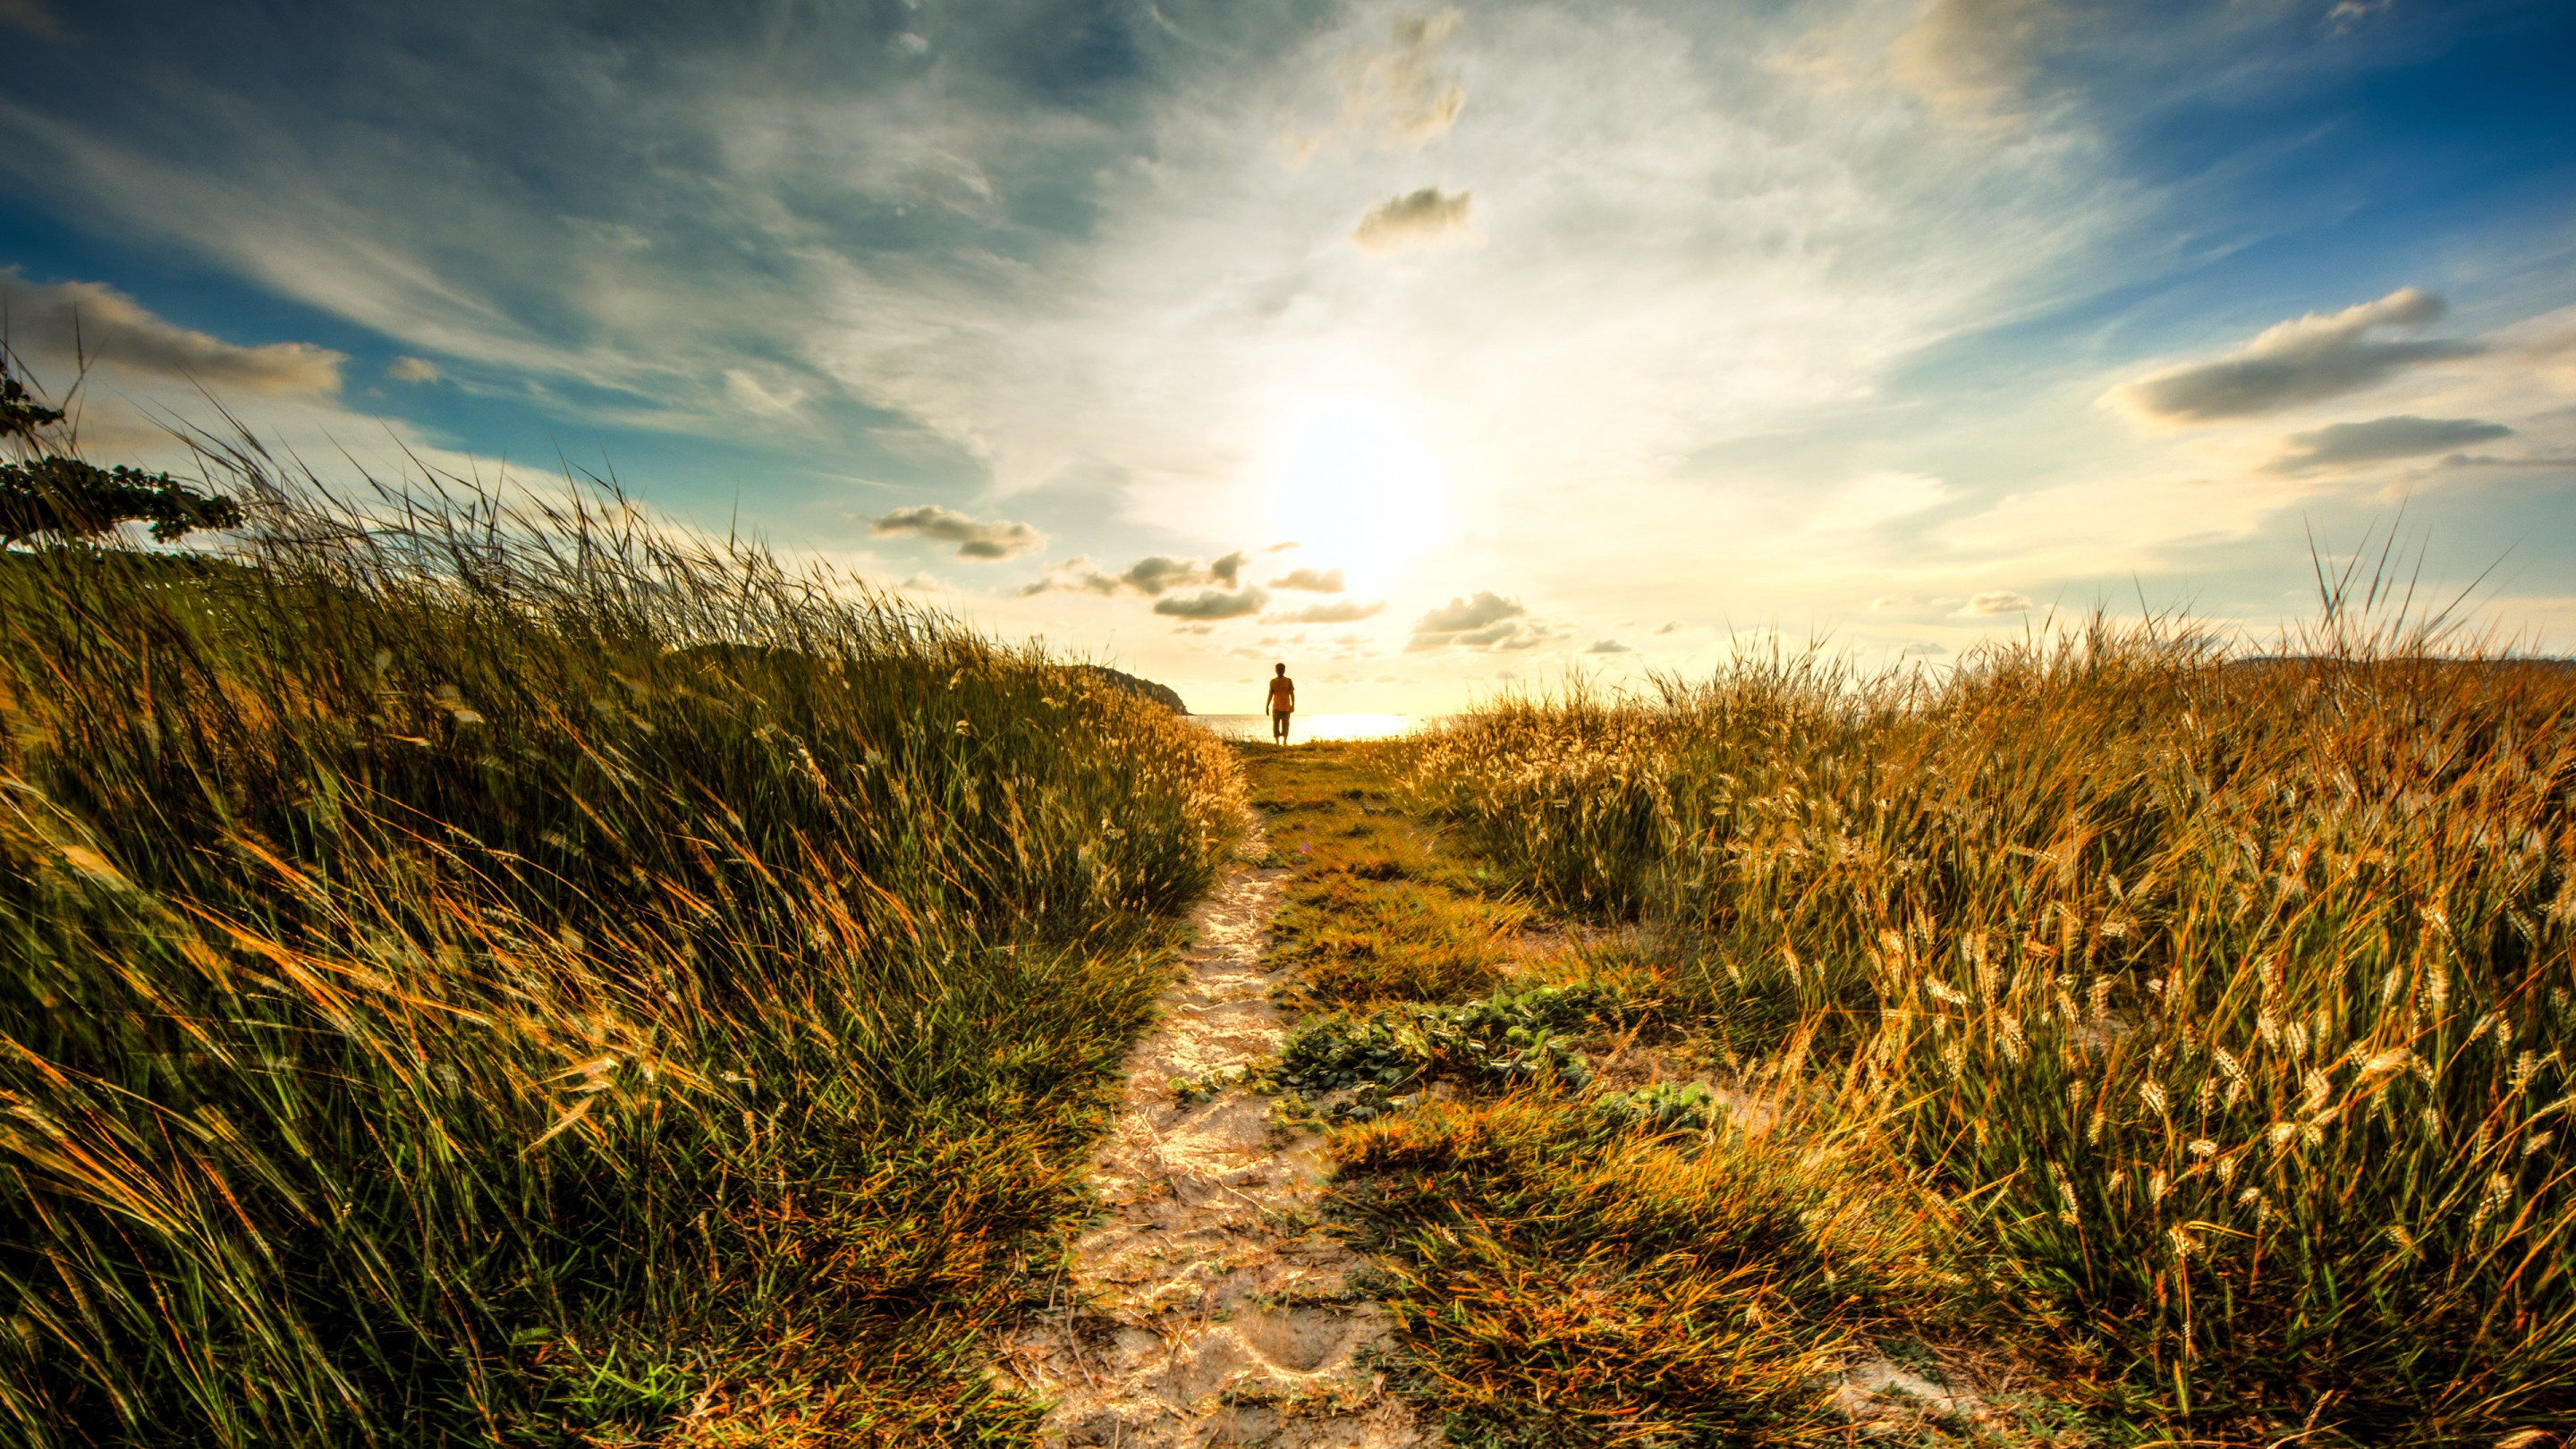 Walk to sunset on the nature path wallpaper 2880x1620